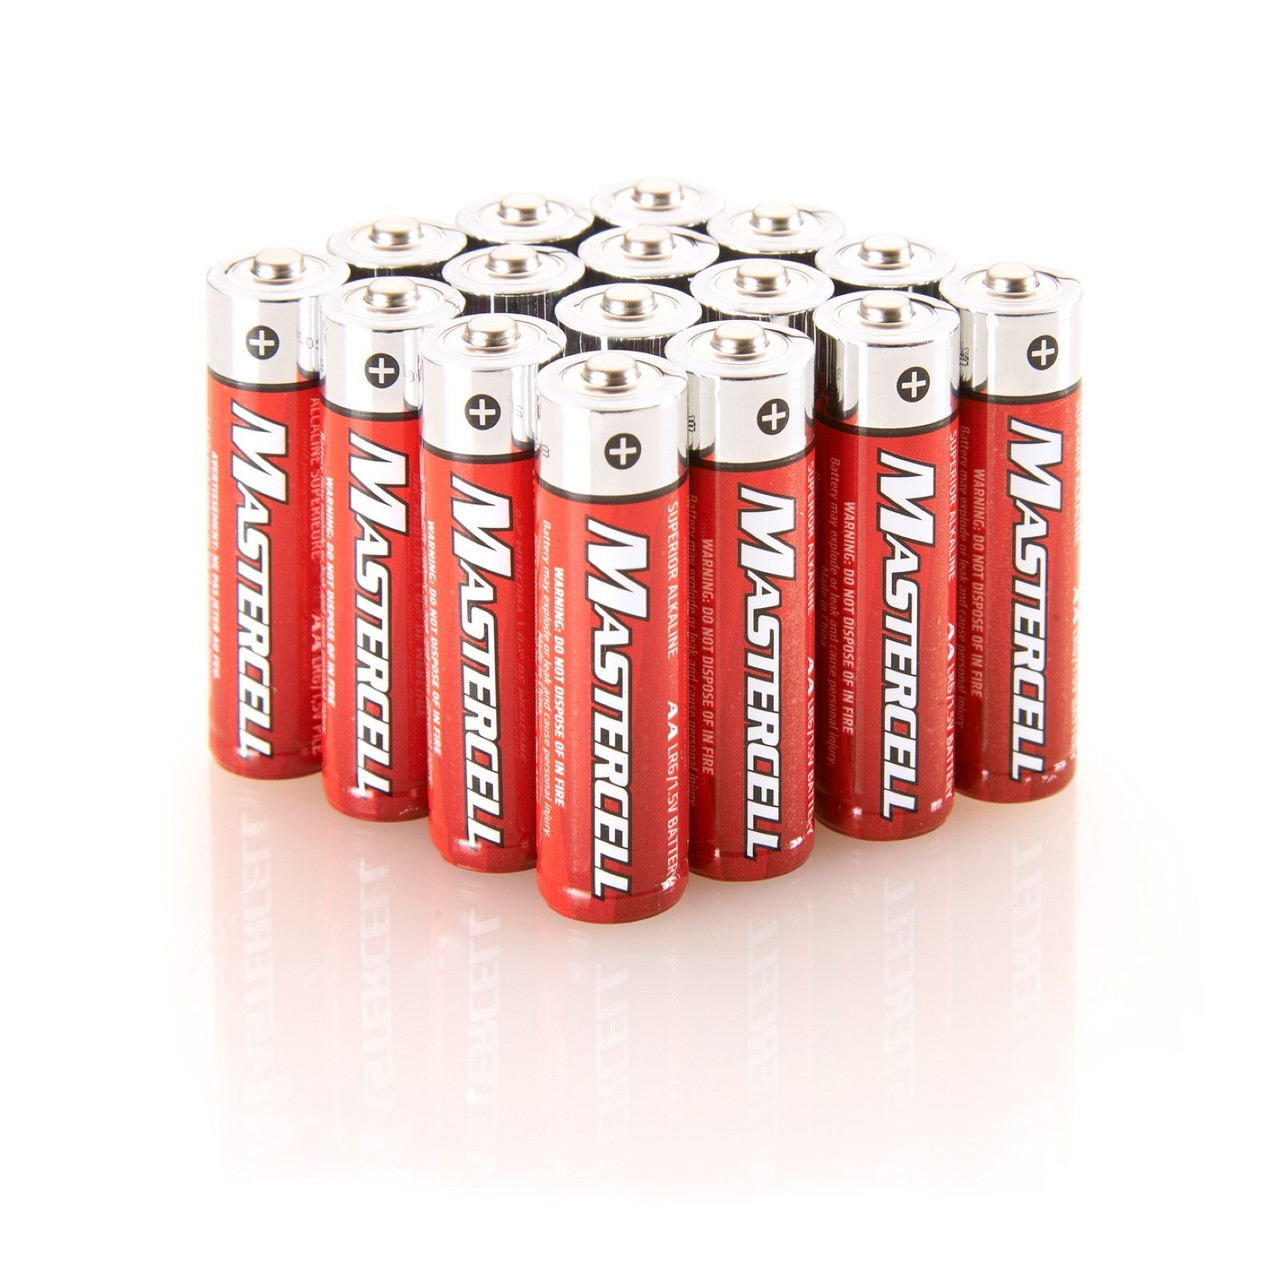 China Non-rechargeable AA LR6 Alkaline Batteries Suppliers